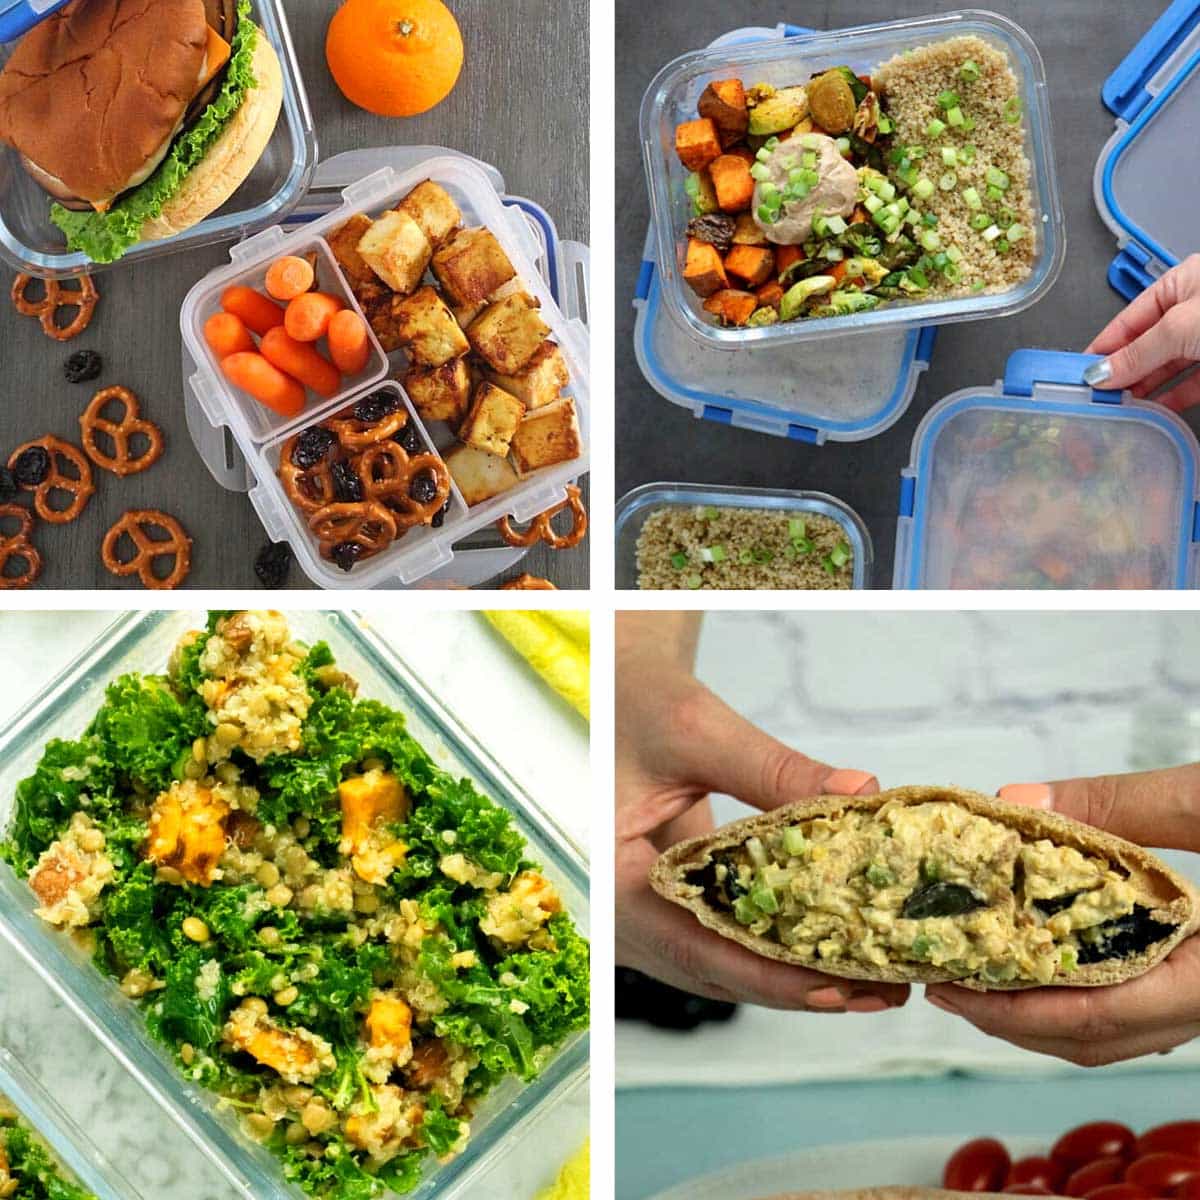 image collage of vegan packed lunches: sandwich, quinoa salad, kale salad, chickpea sandwich